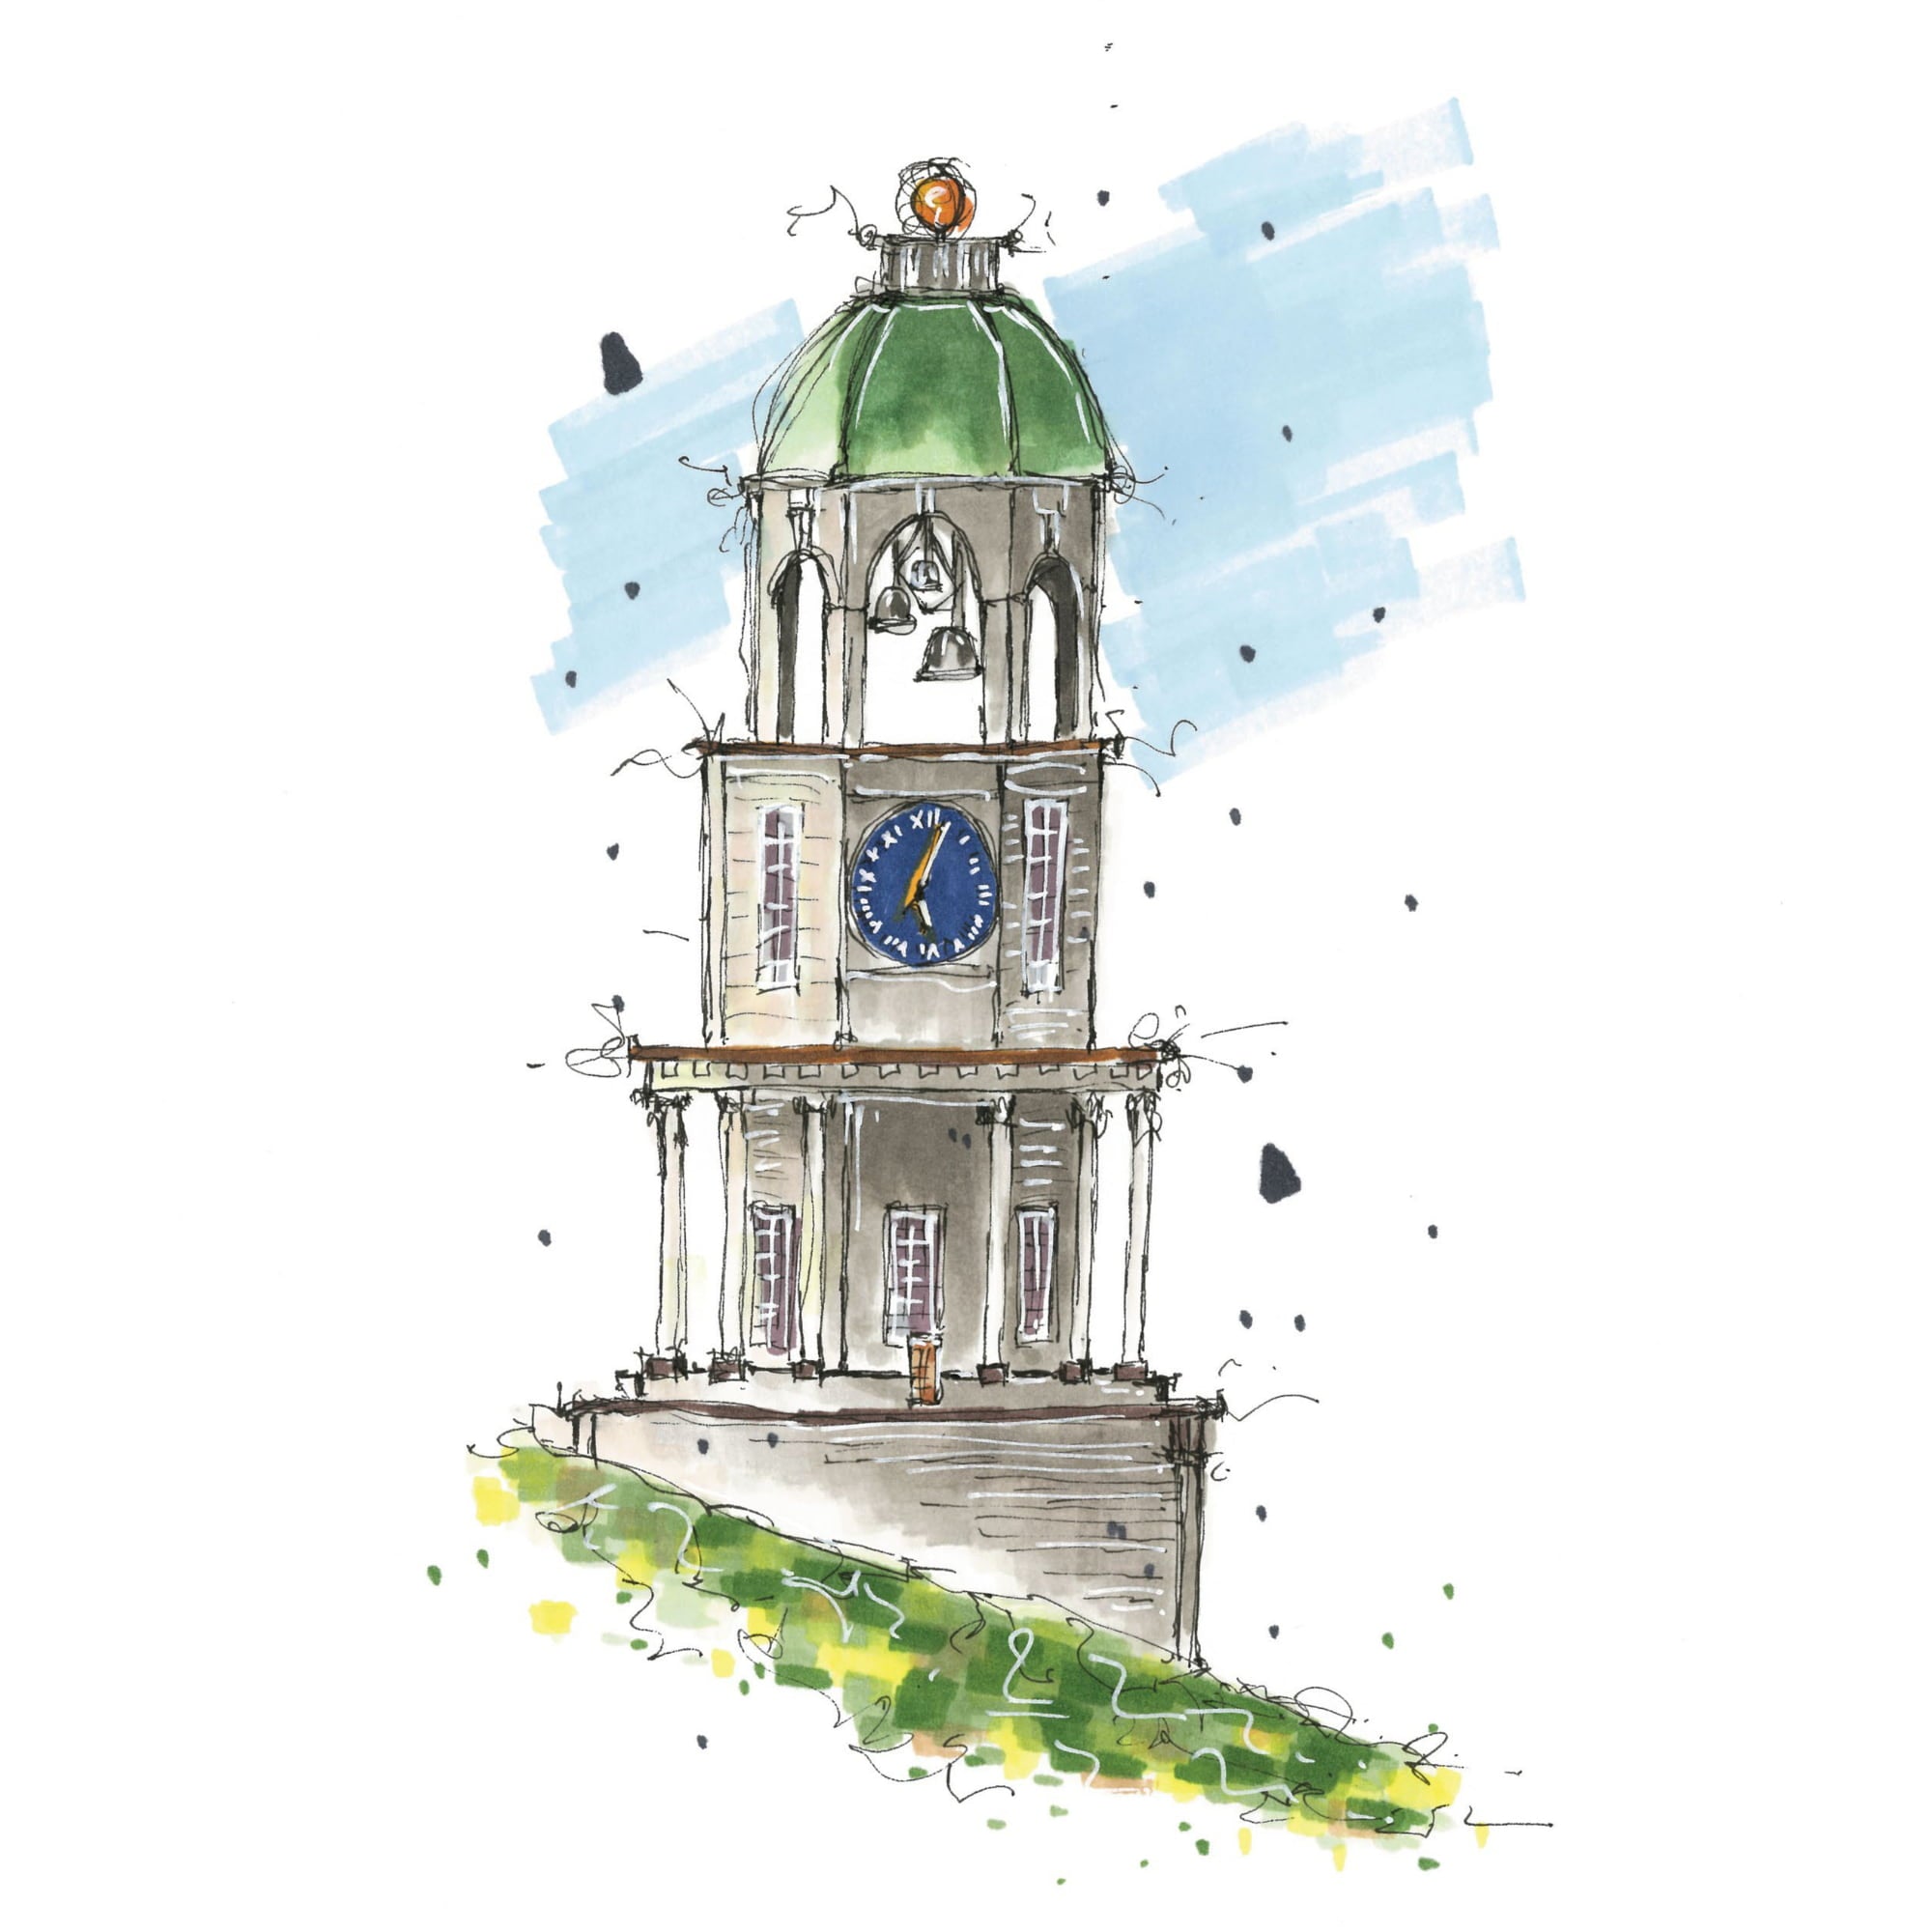 A drawing i made of an old clock tower in Massachusetts : r/ArchitecturePorn